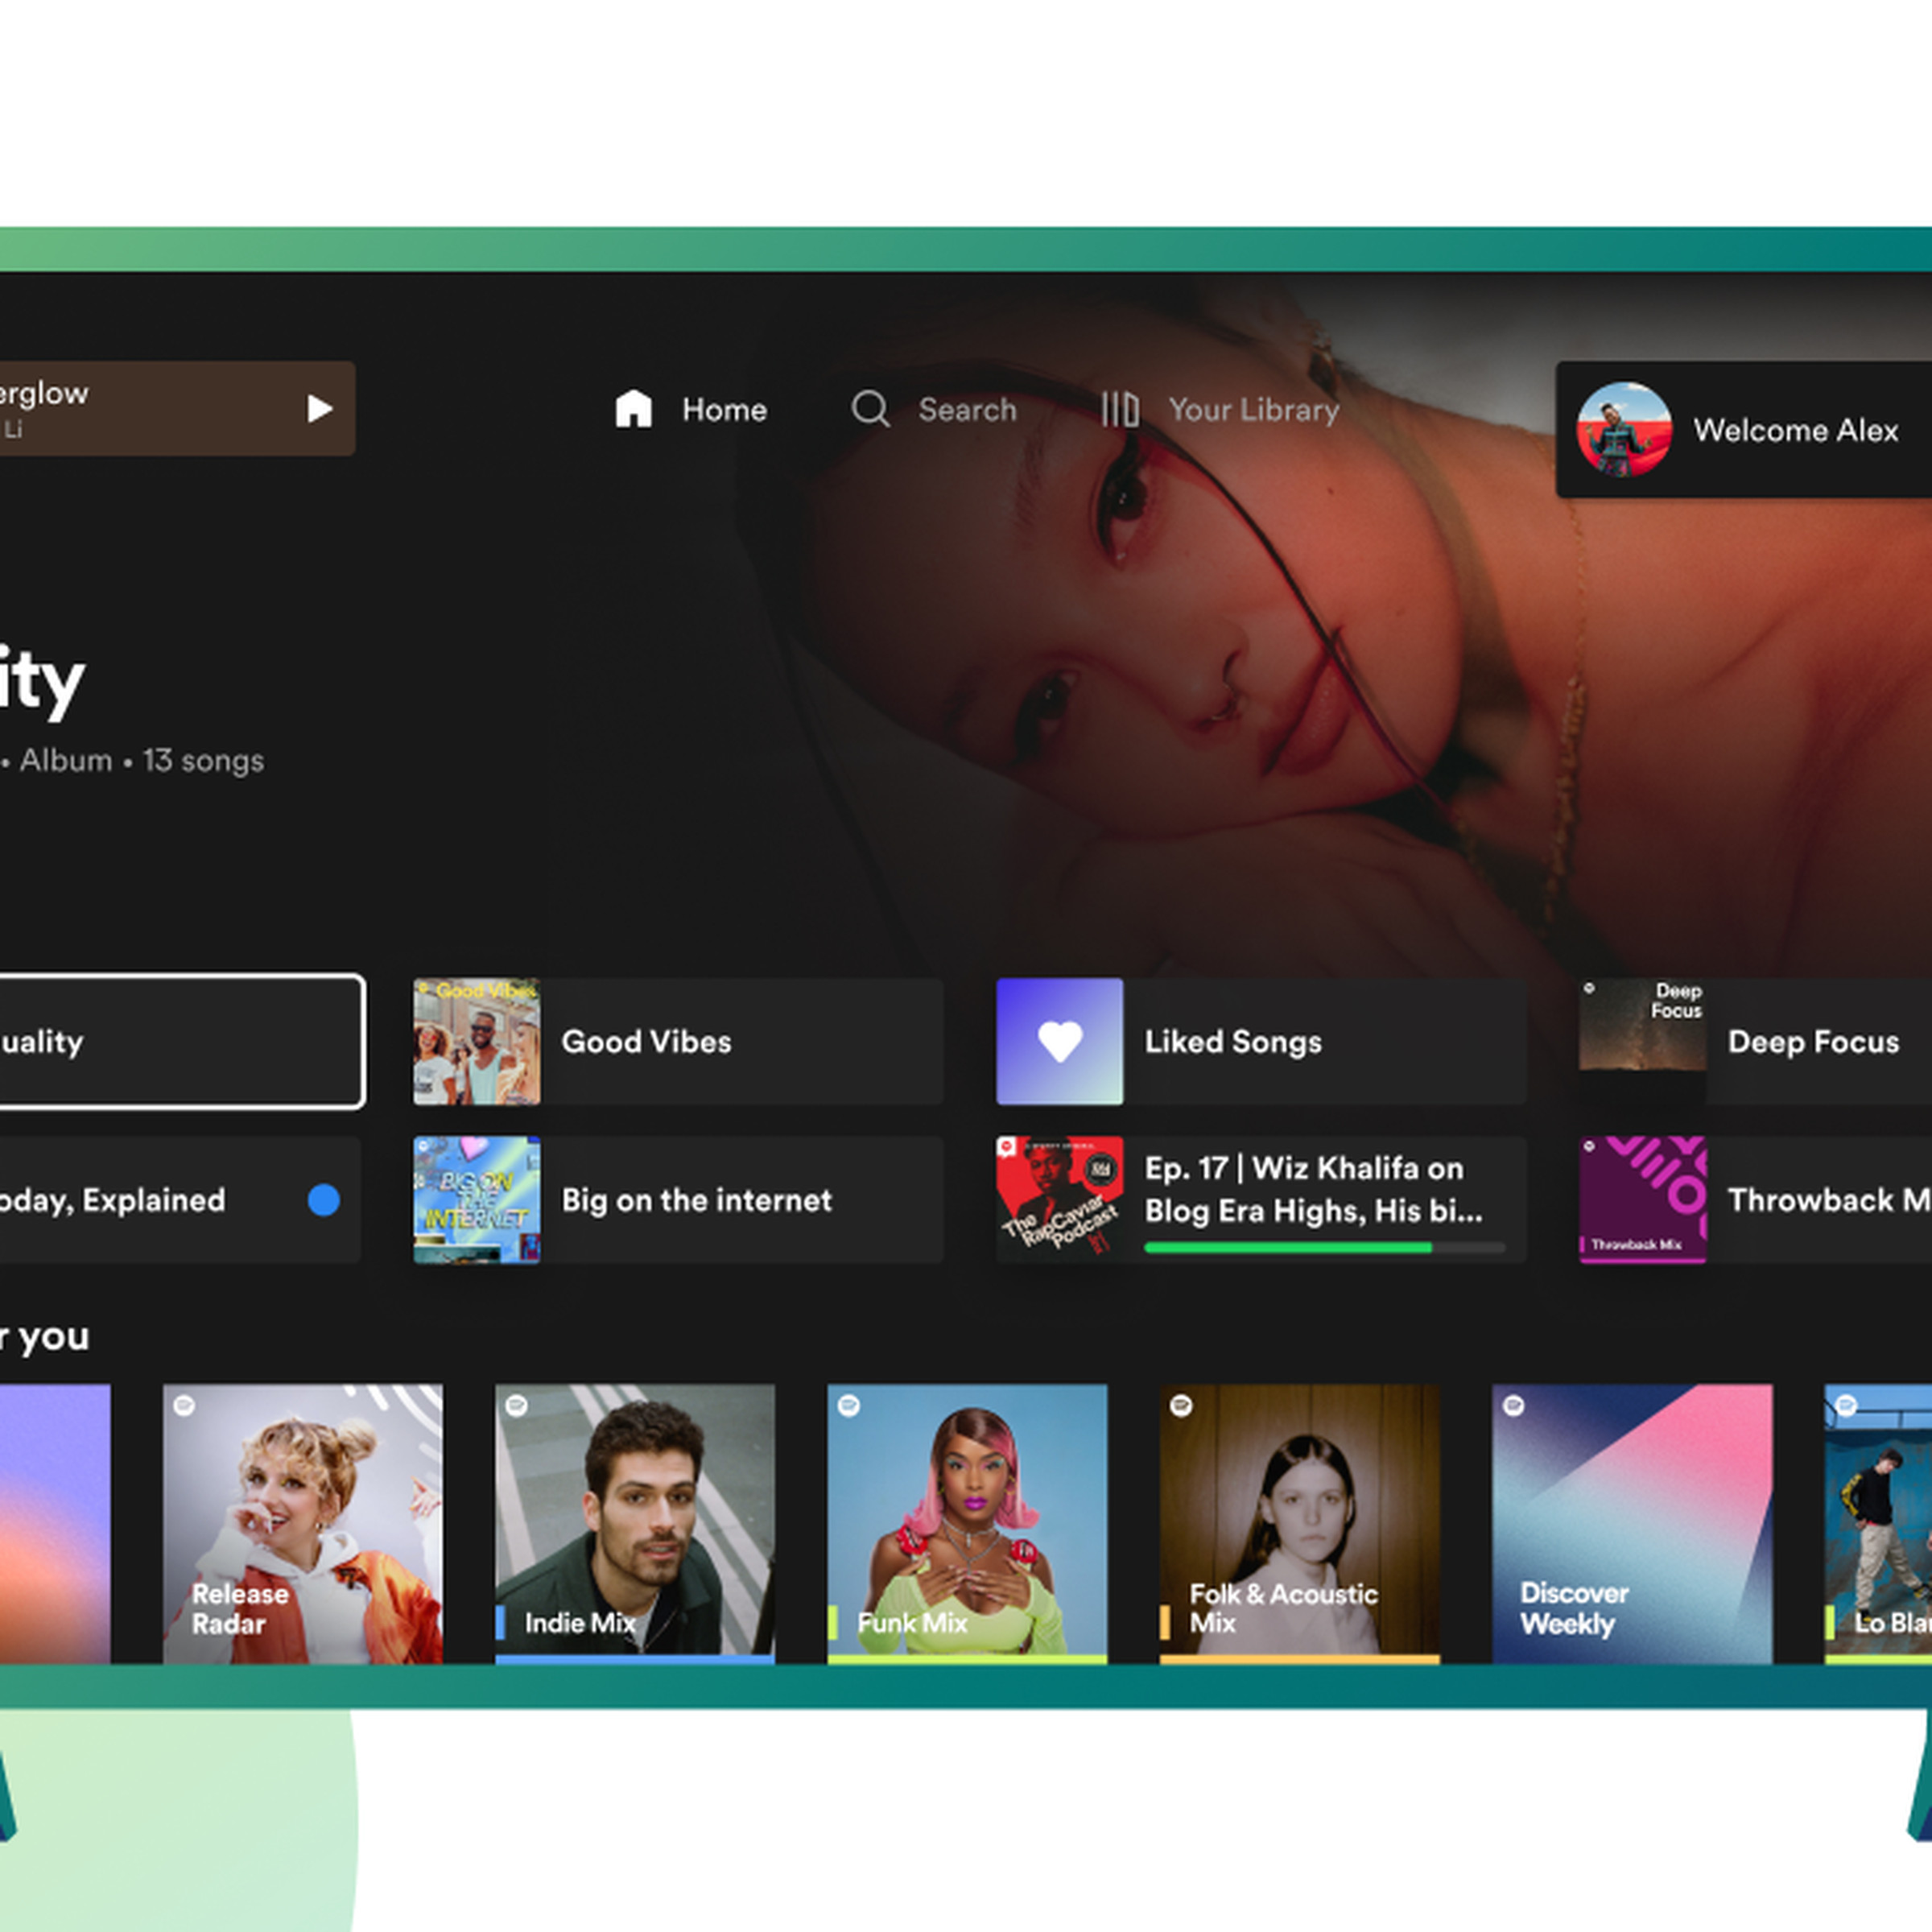 An image showing the Spotify app on TV